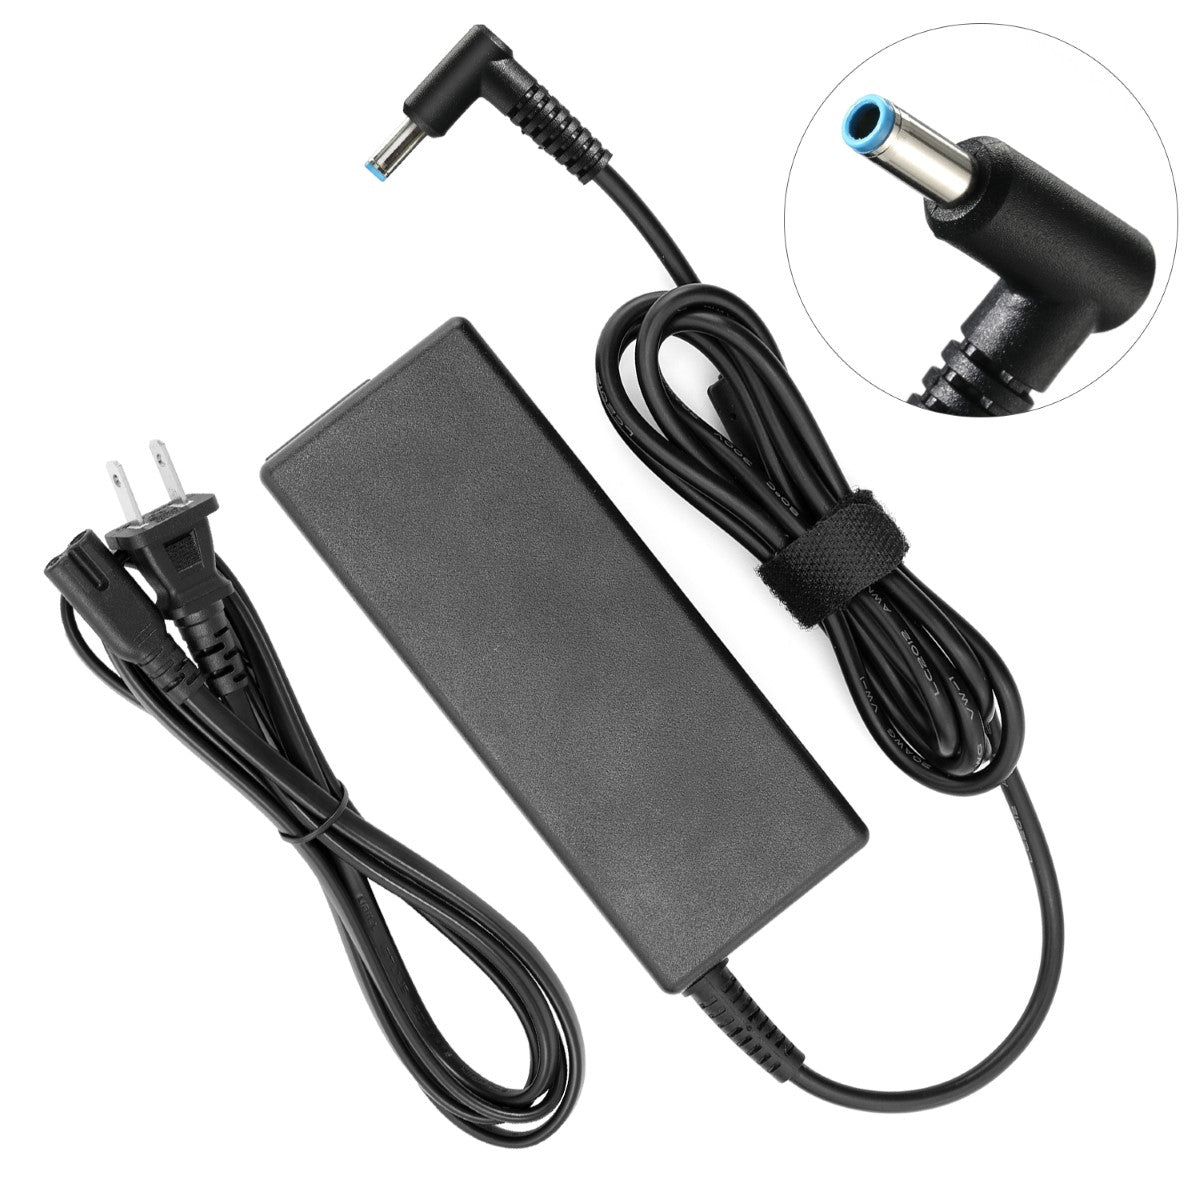 Power Adapter for Monitor and TVs